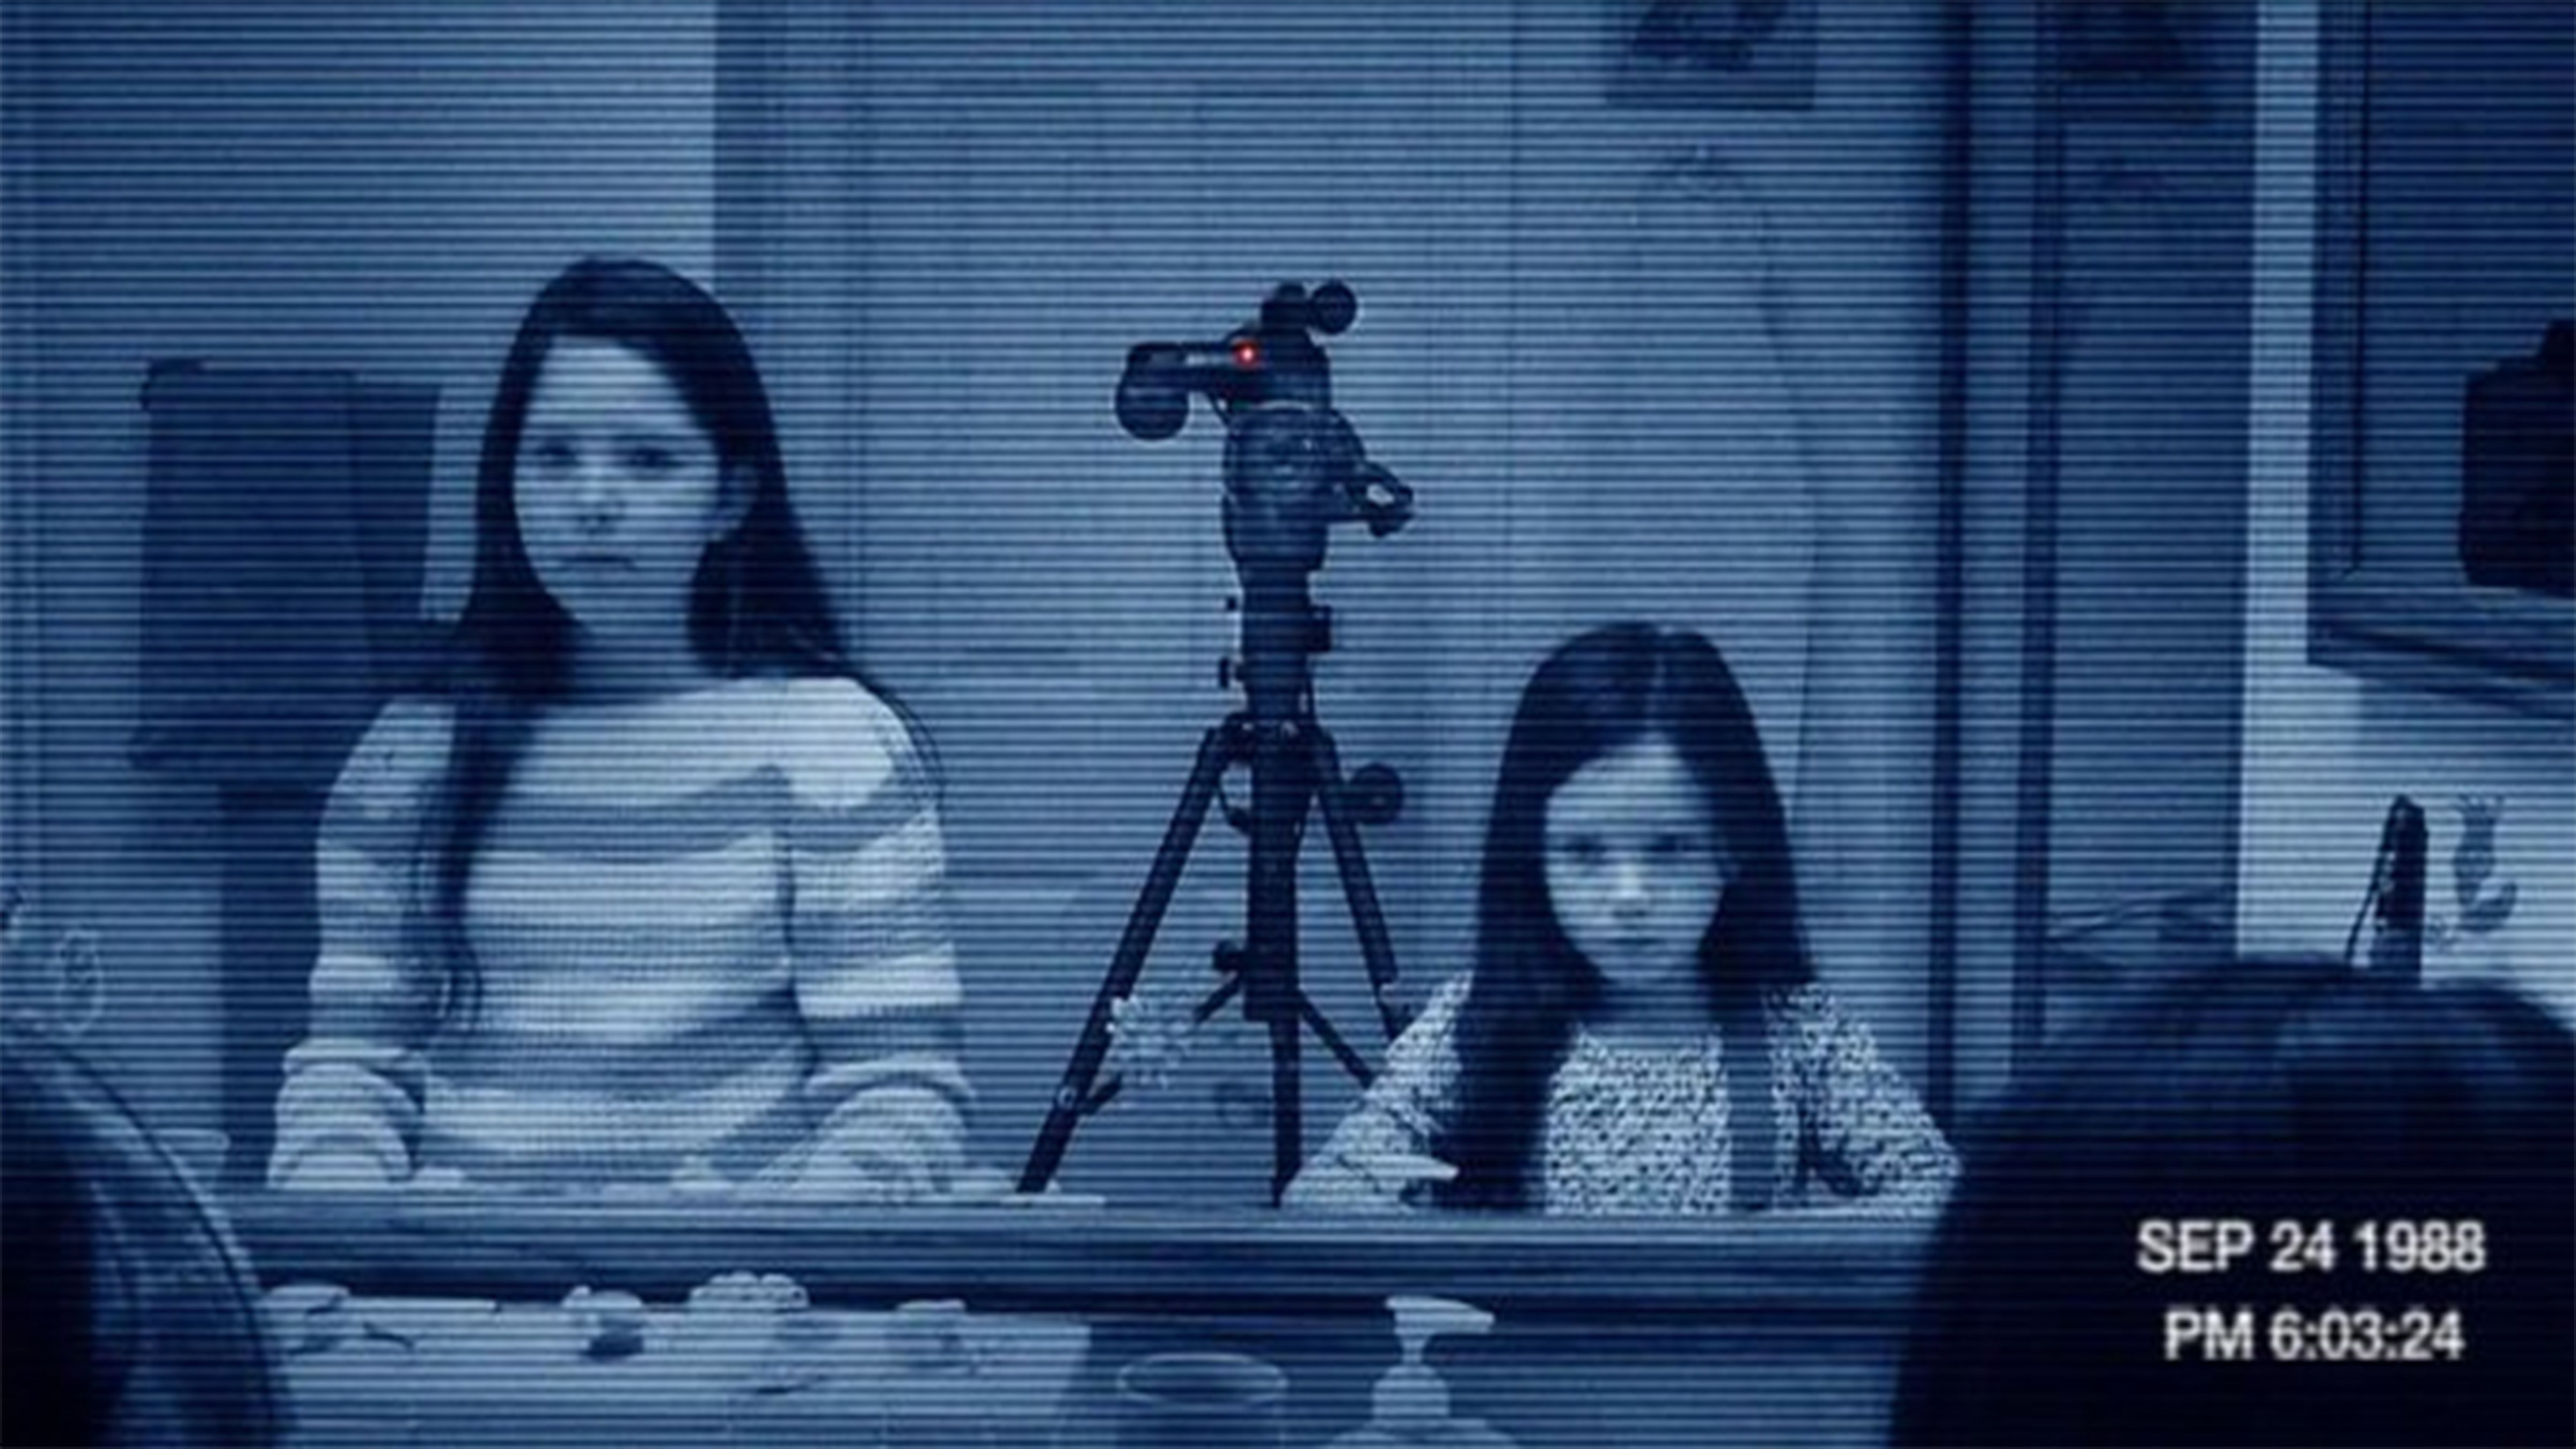 Prepare to be spooked; “Paranormal Activity 7” premieres this Halloween  photo from collied